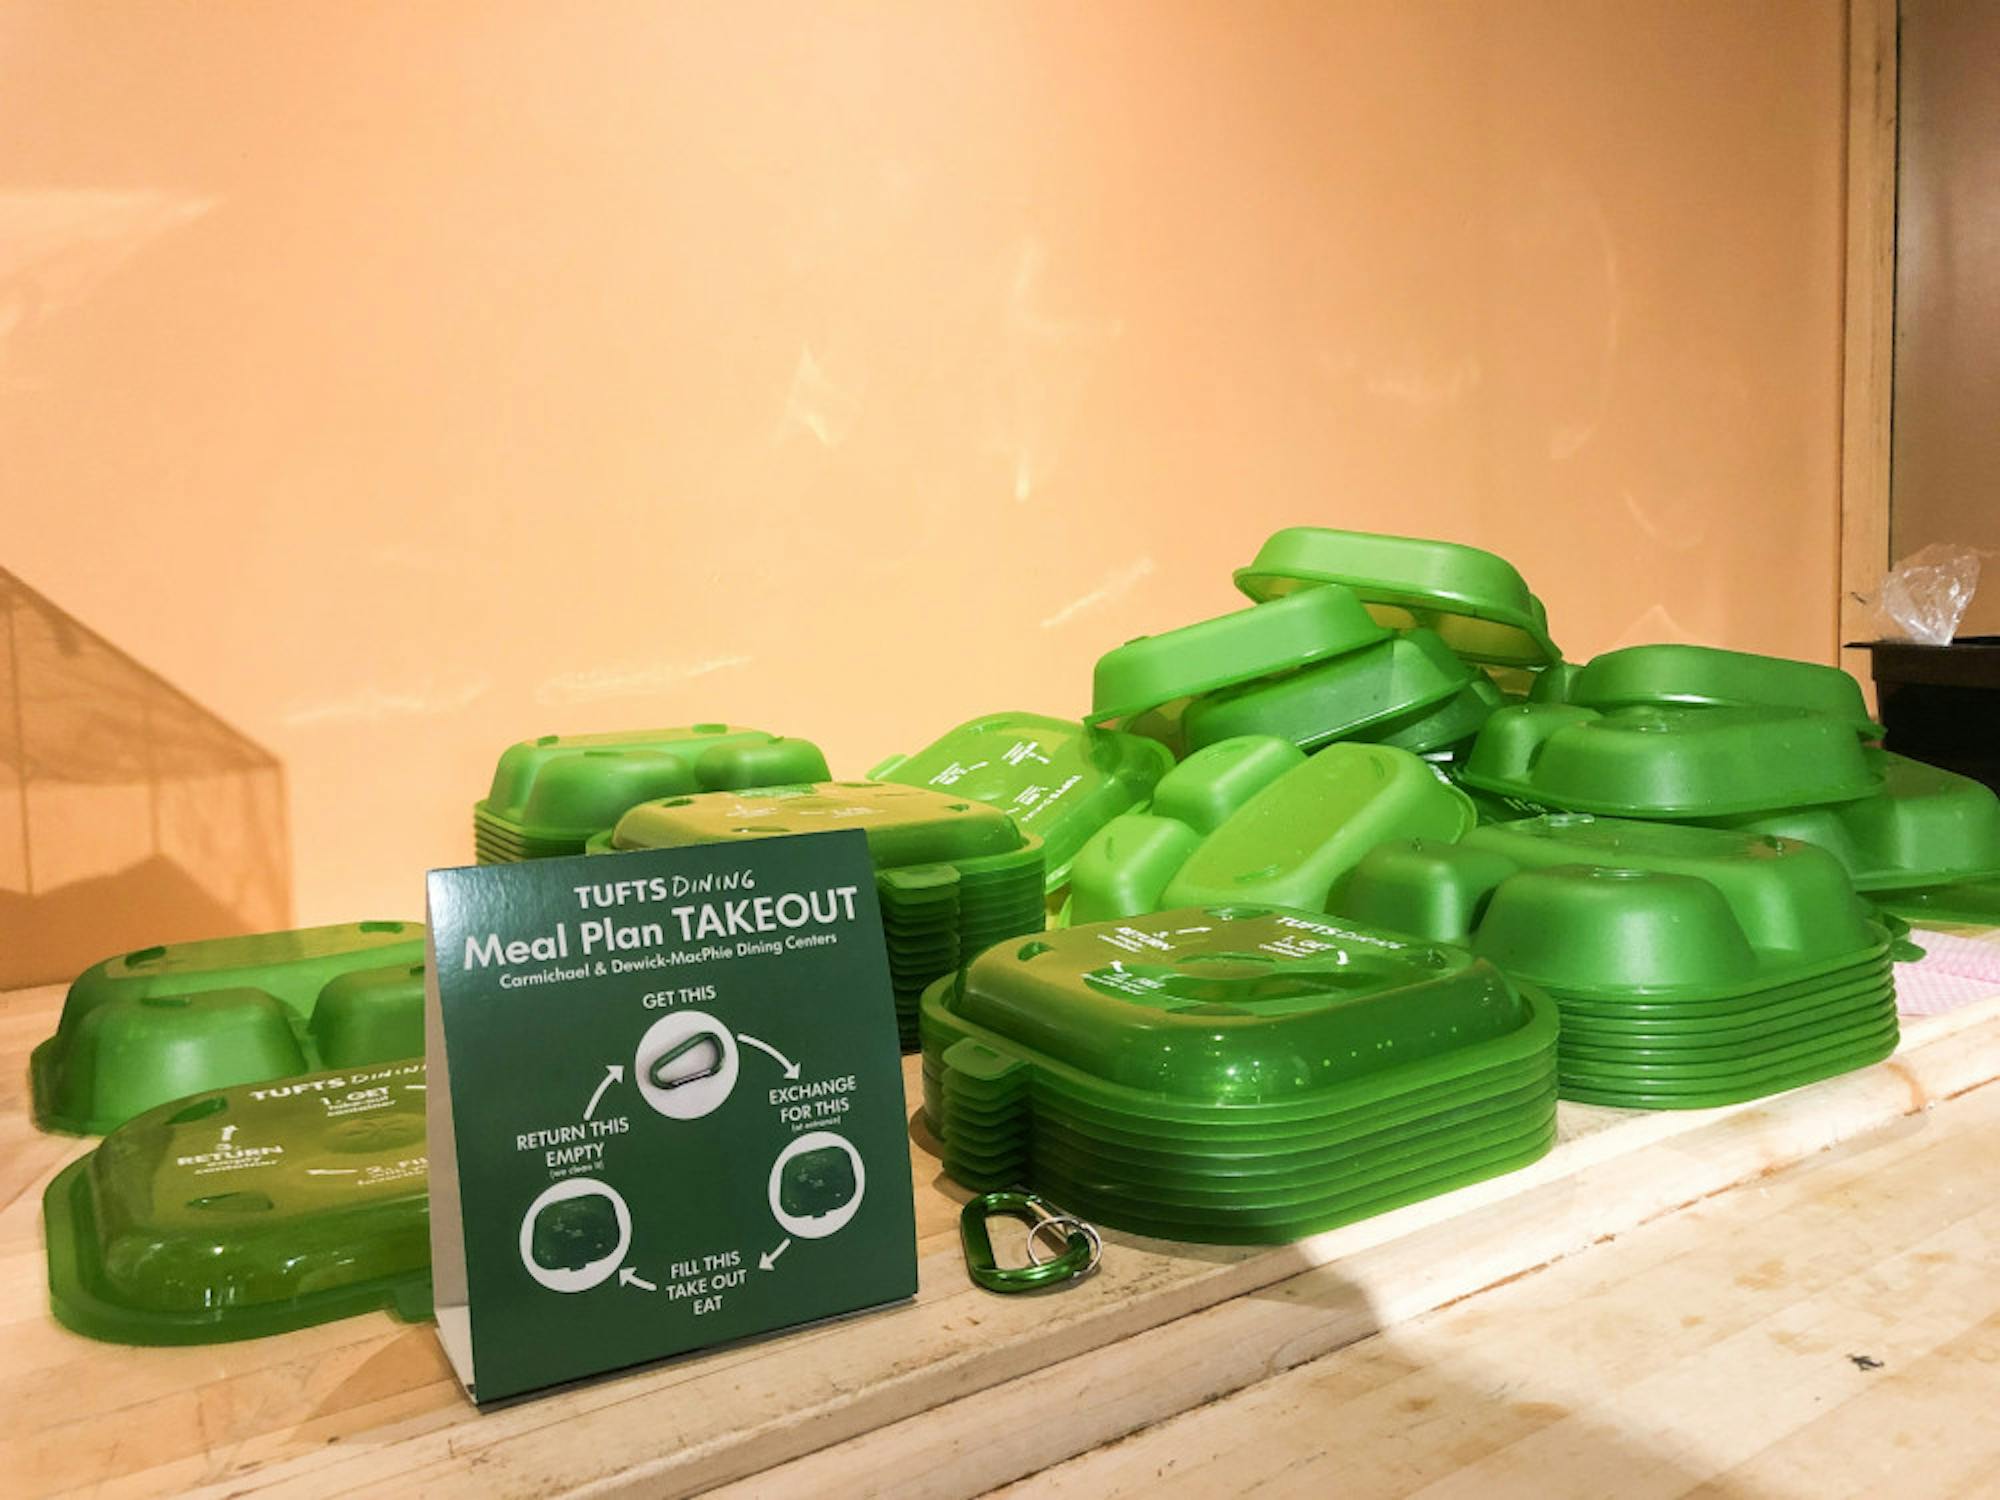 M Dining expands reusable To-Go container program